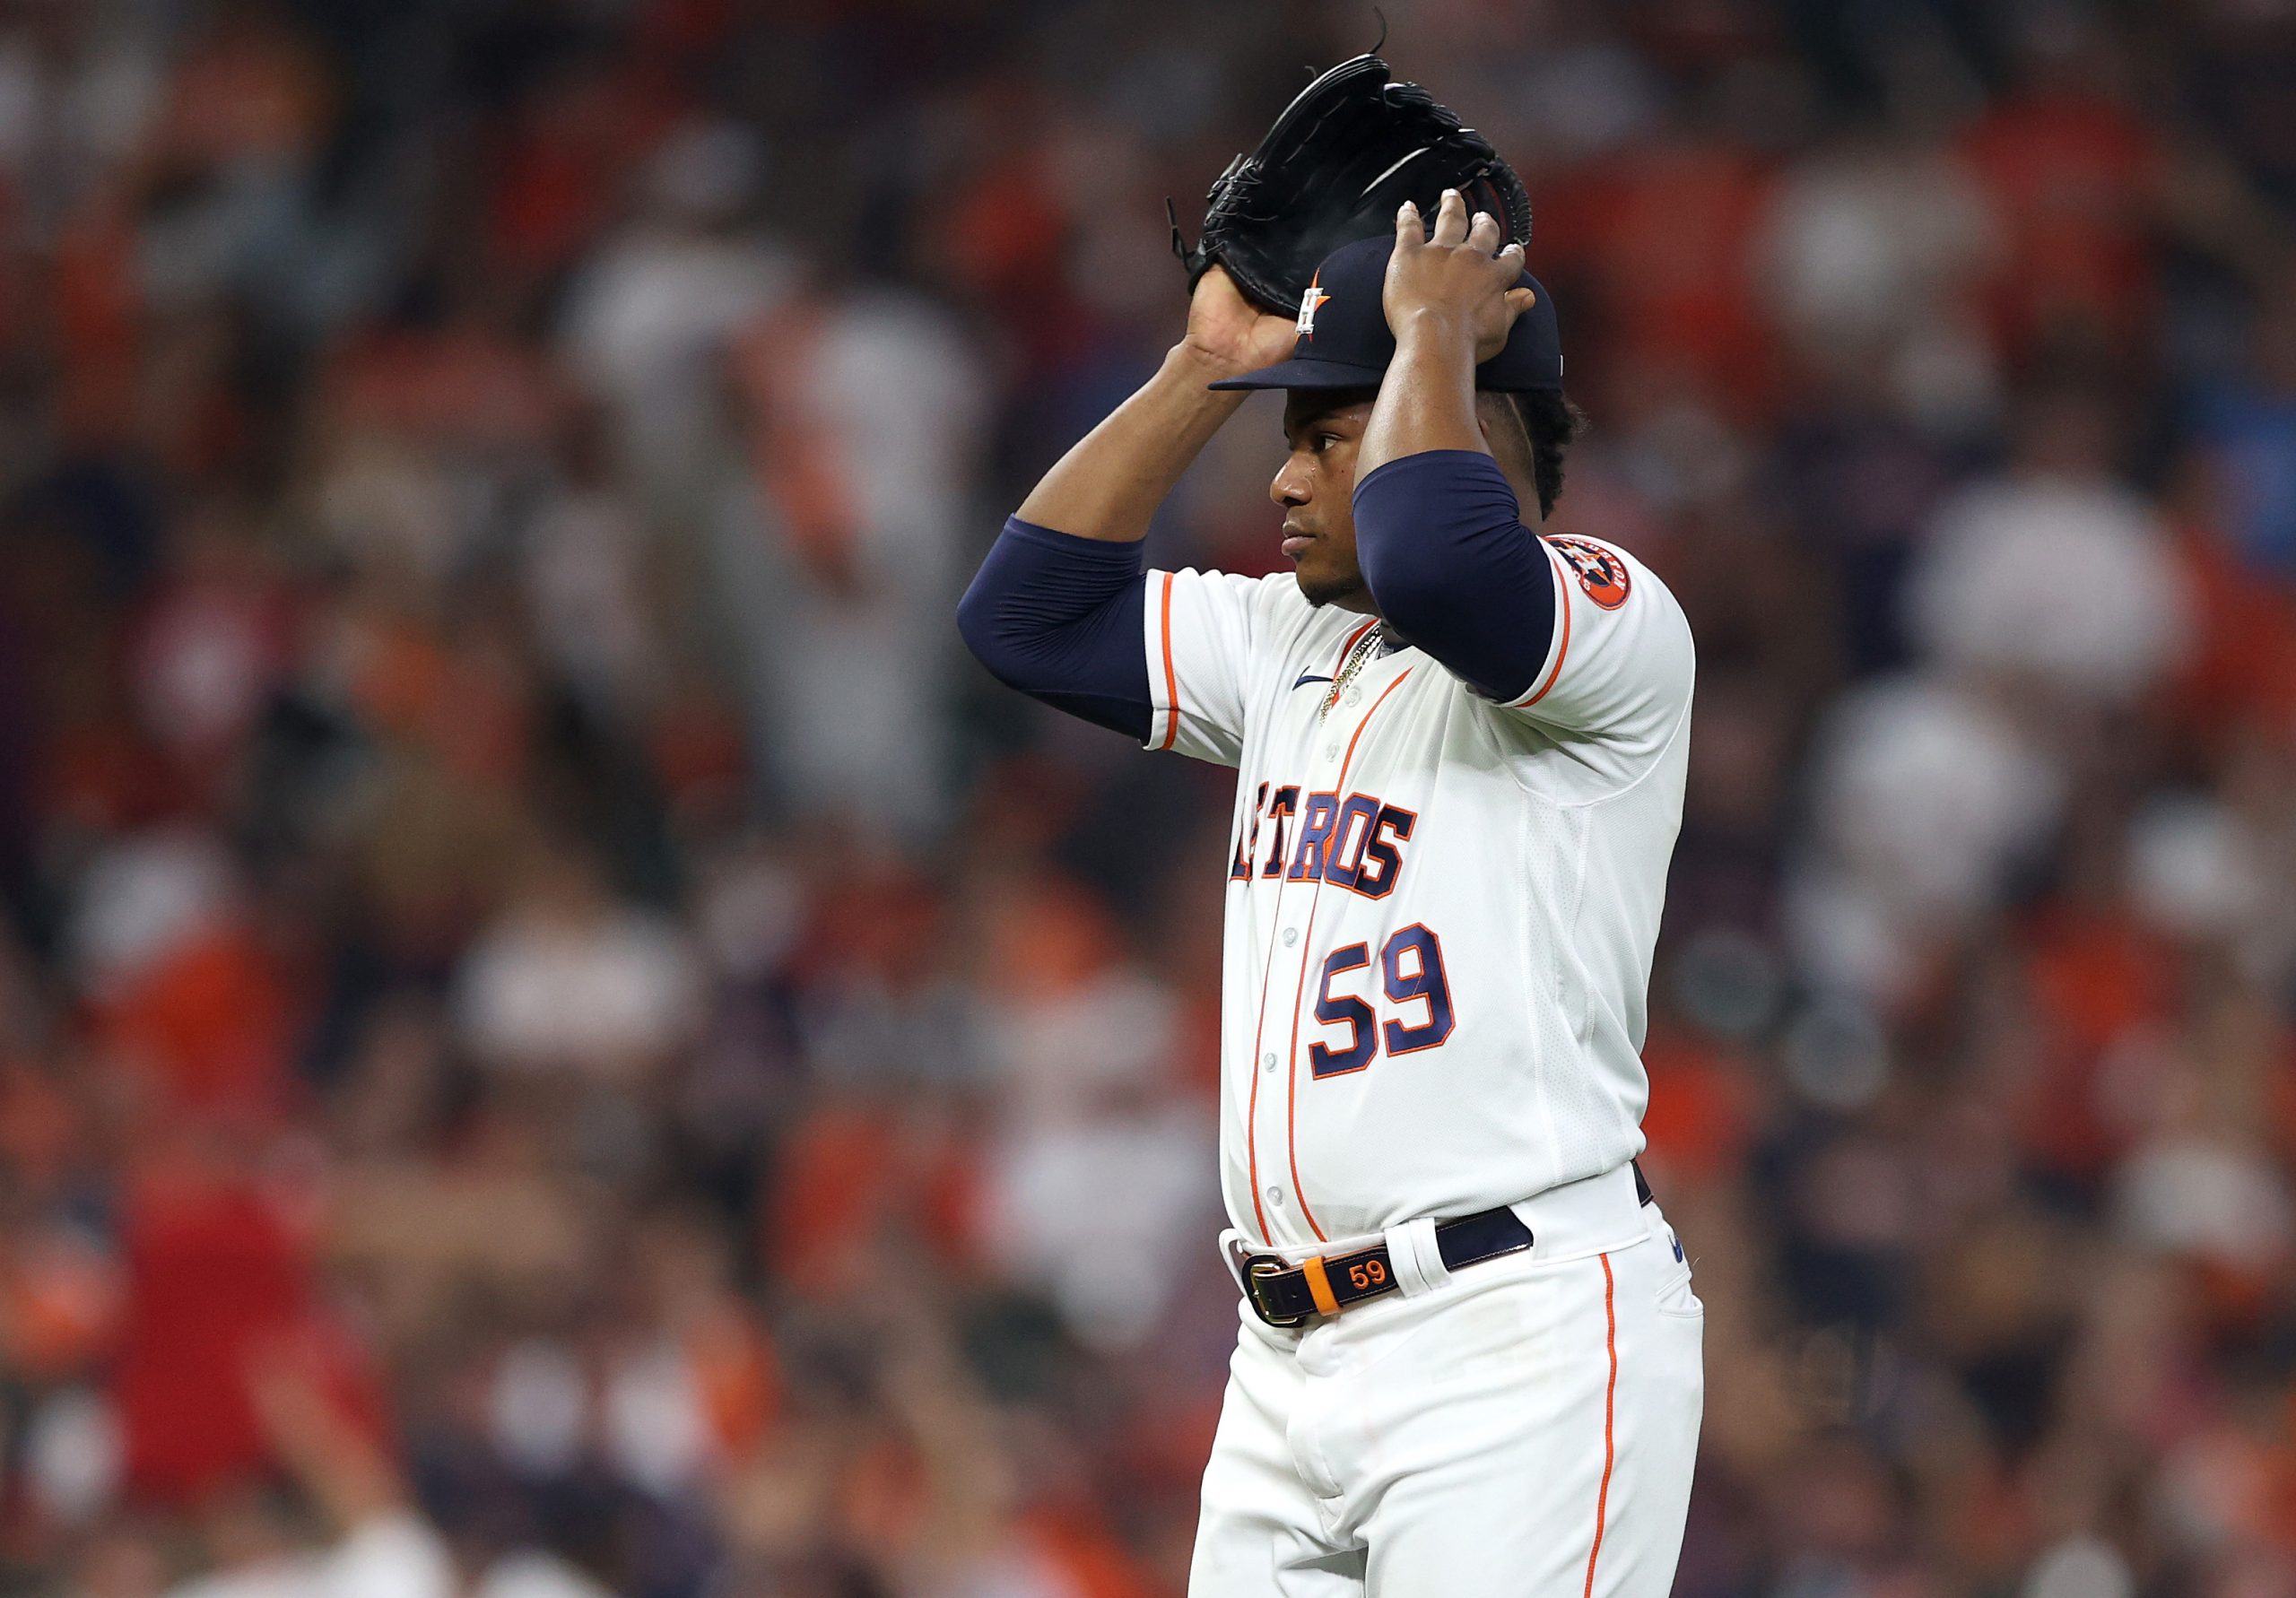 Framber Valdez of the Houston Astros reacts after he gave up a home run to Enrique Hernandez.